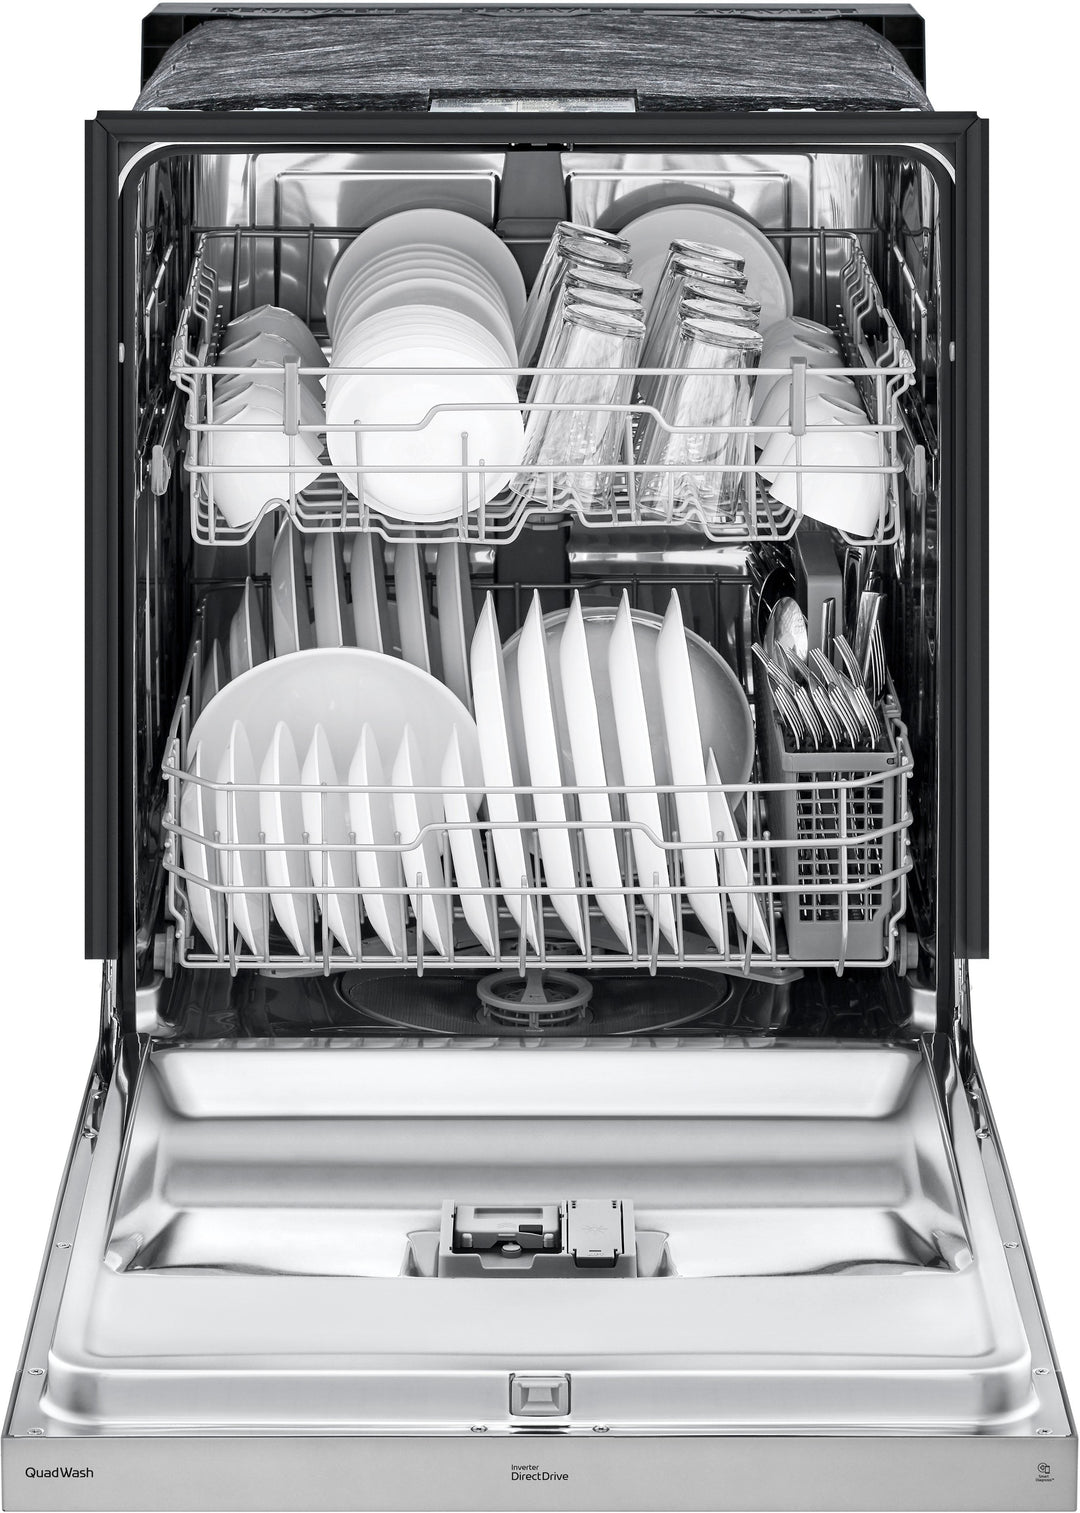 LG - 24" Front-Control Built-In Dishwasher with Stainless Steel Tub, QuadWash, 50 dBa - Stainless steel_9